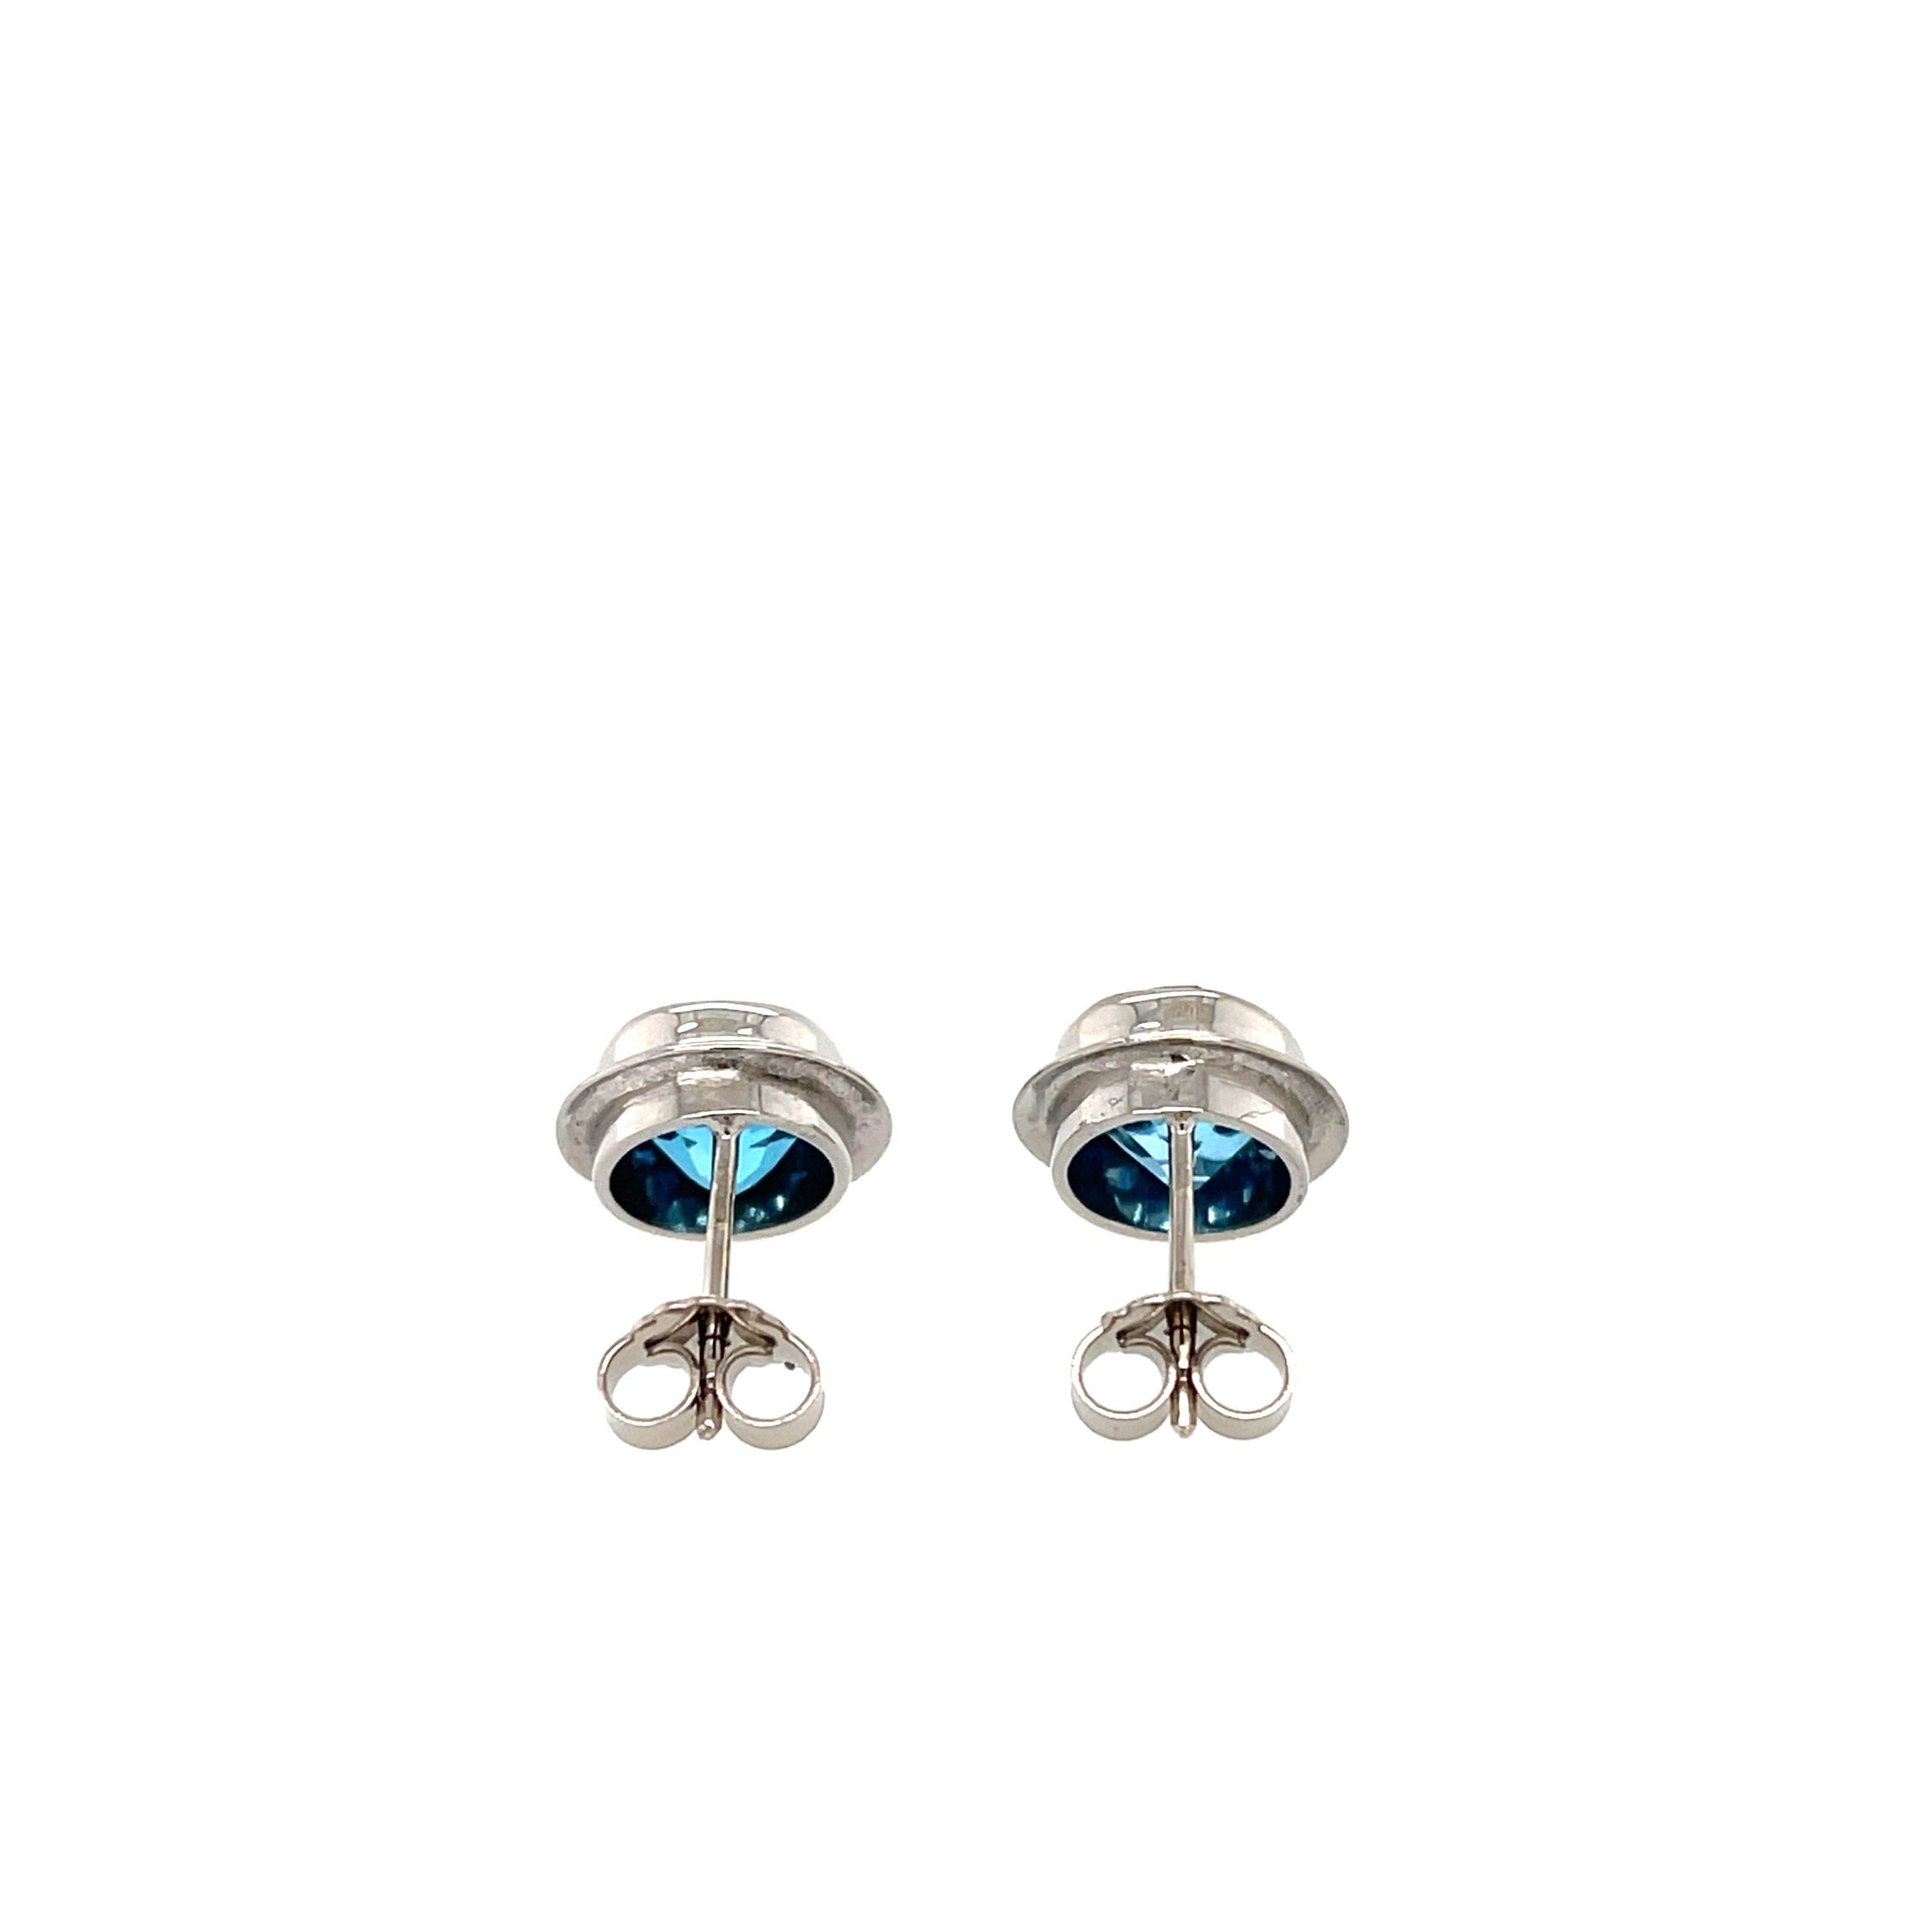 18ct White Gold 6.80ct Oval Blue Topaz Stud Earrings